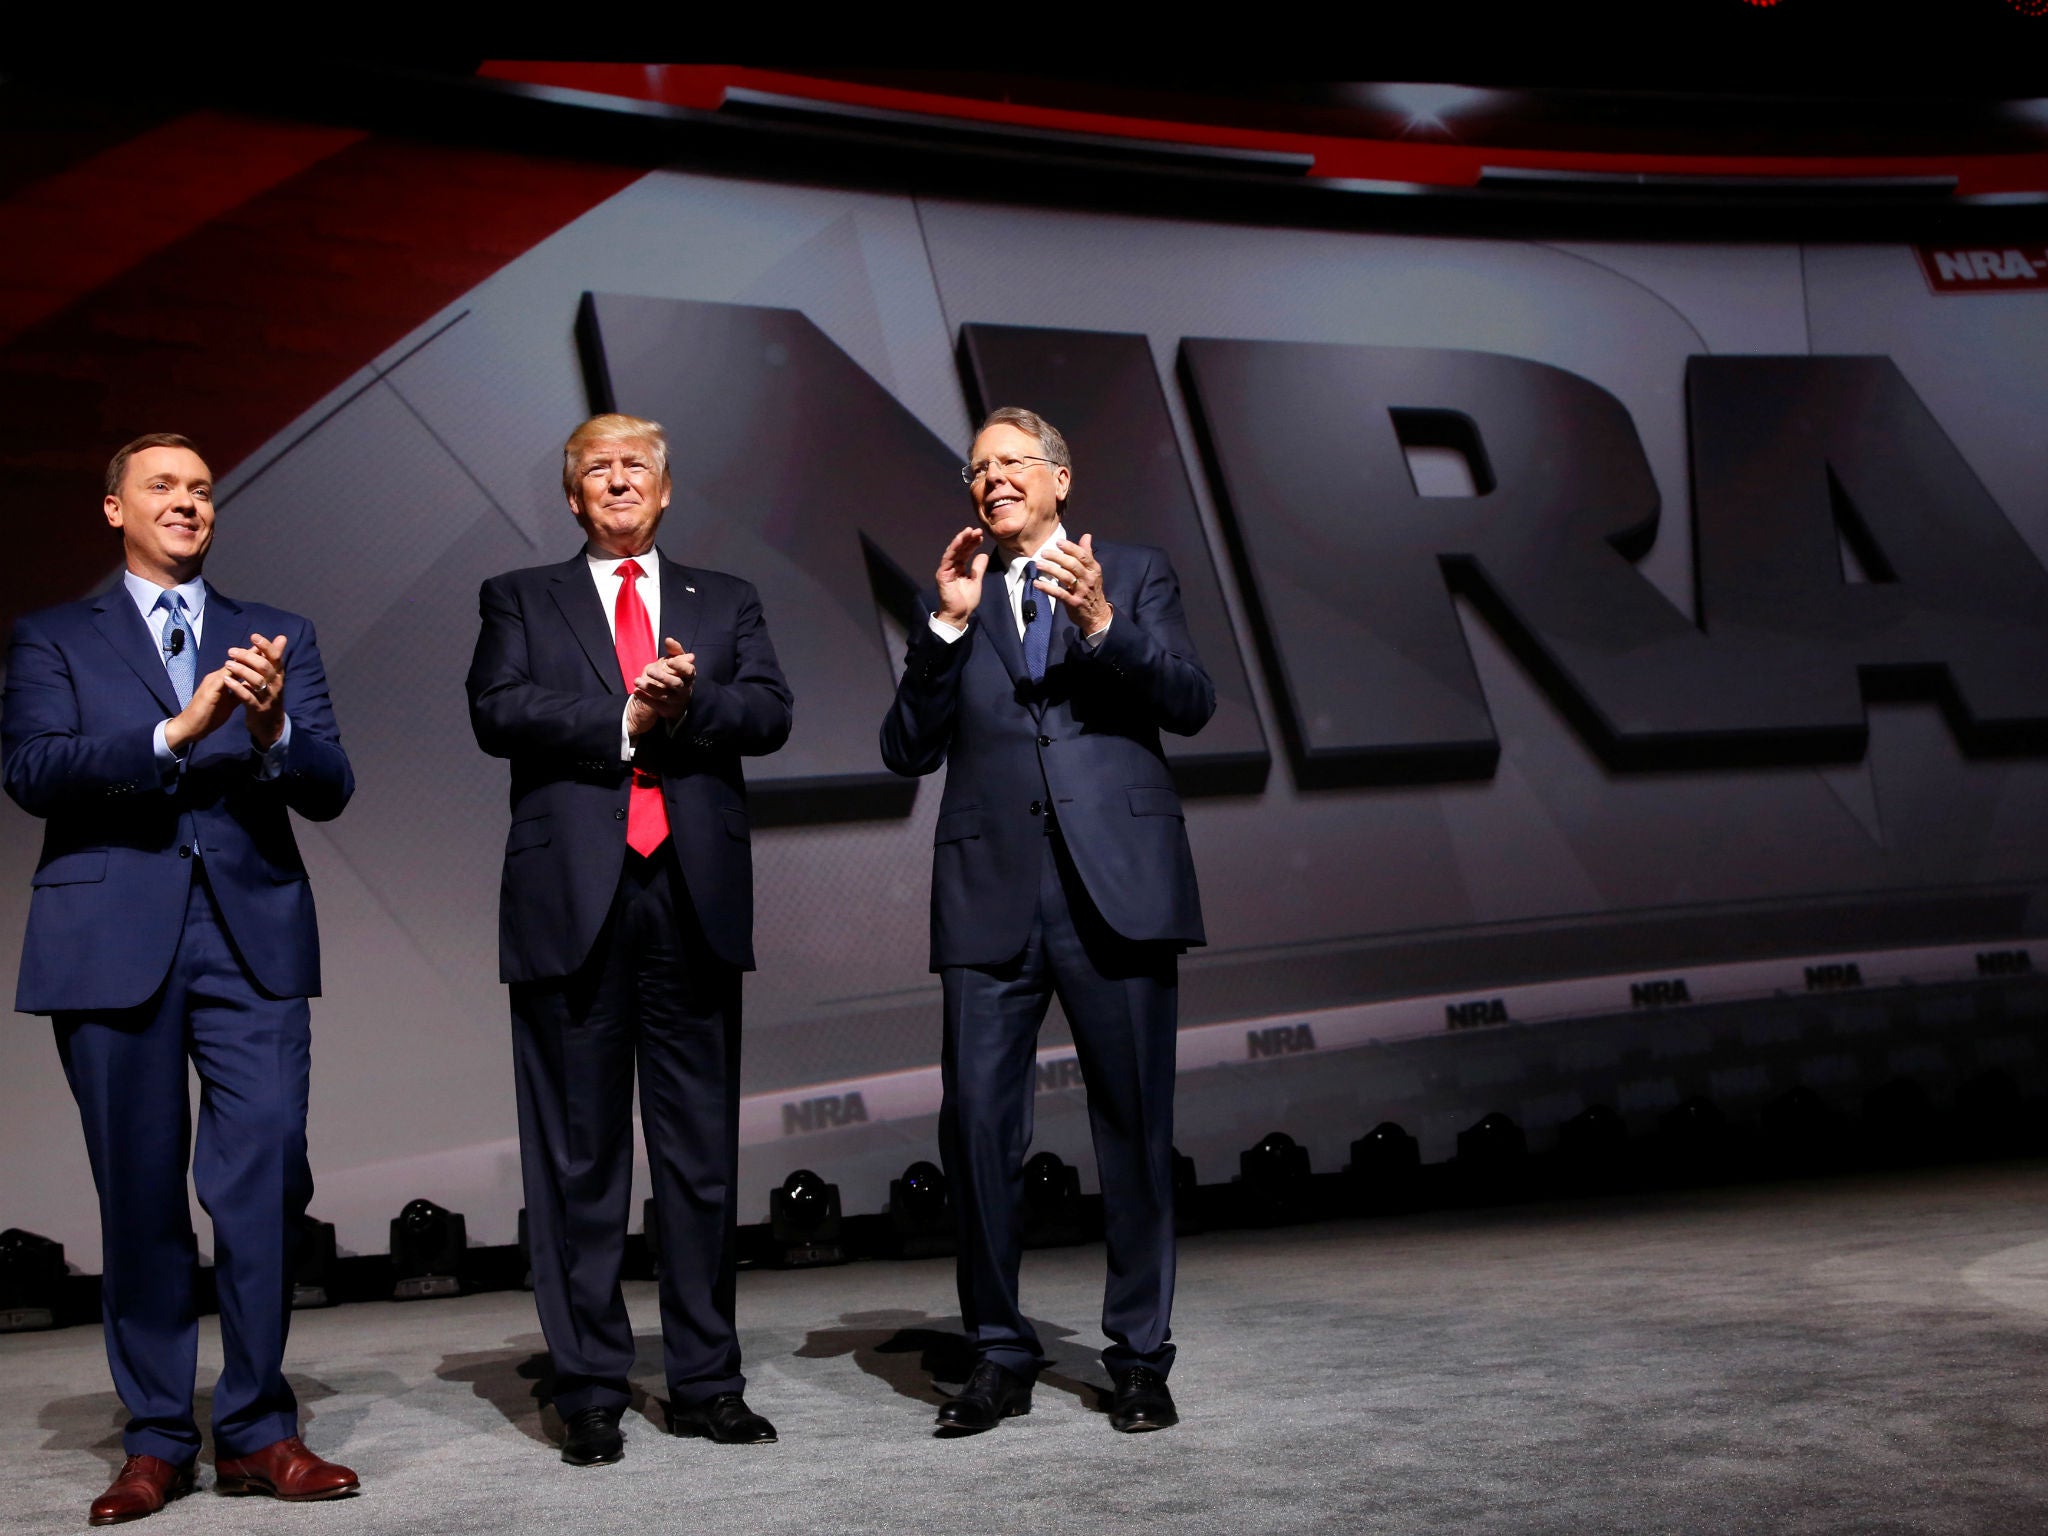 Donald Trump with National Rifle Association officials during last year's Leadership Forum in Atlanta, Georgia